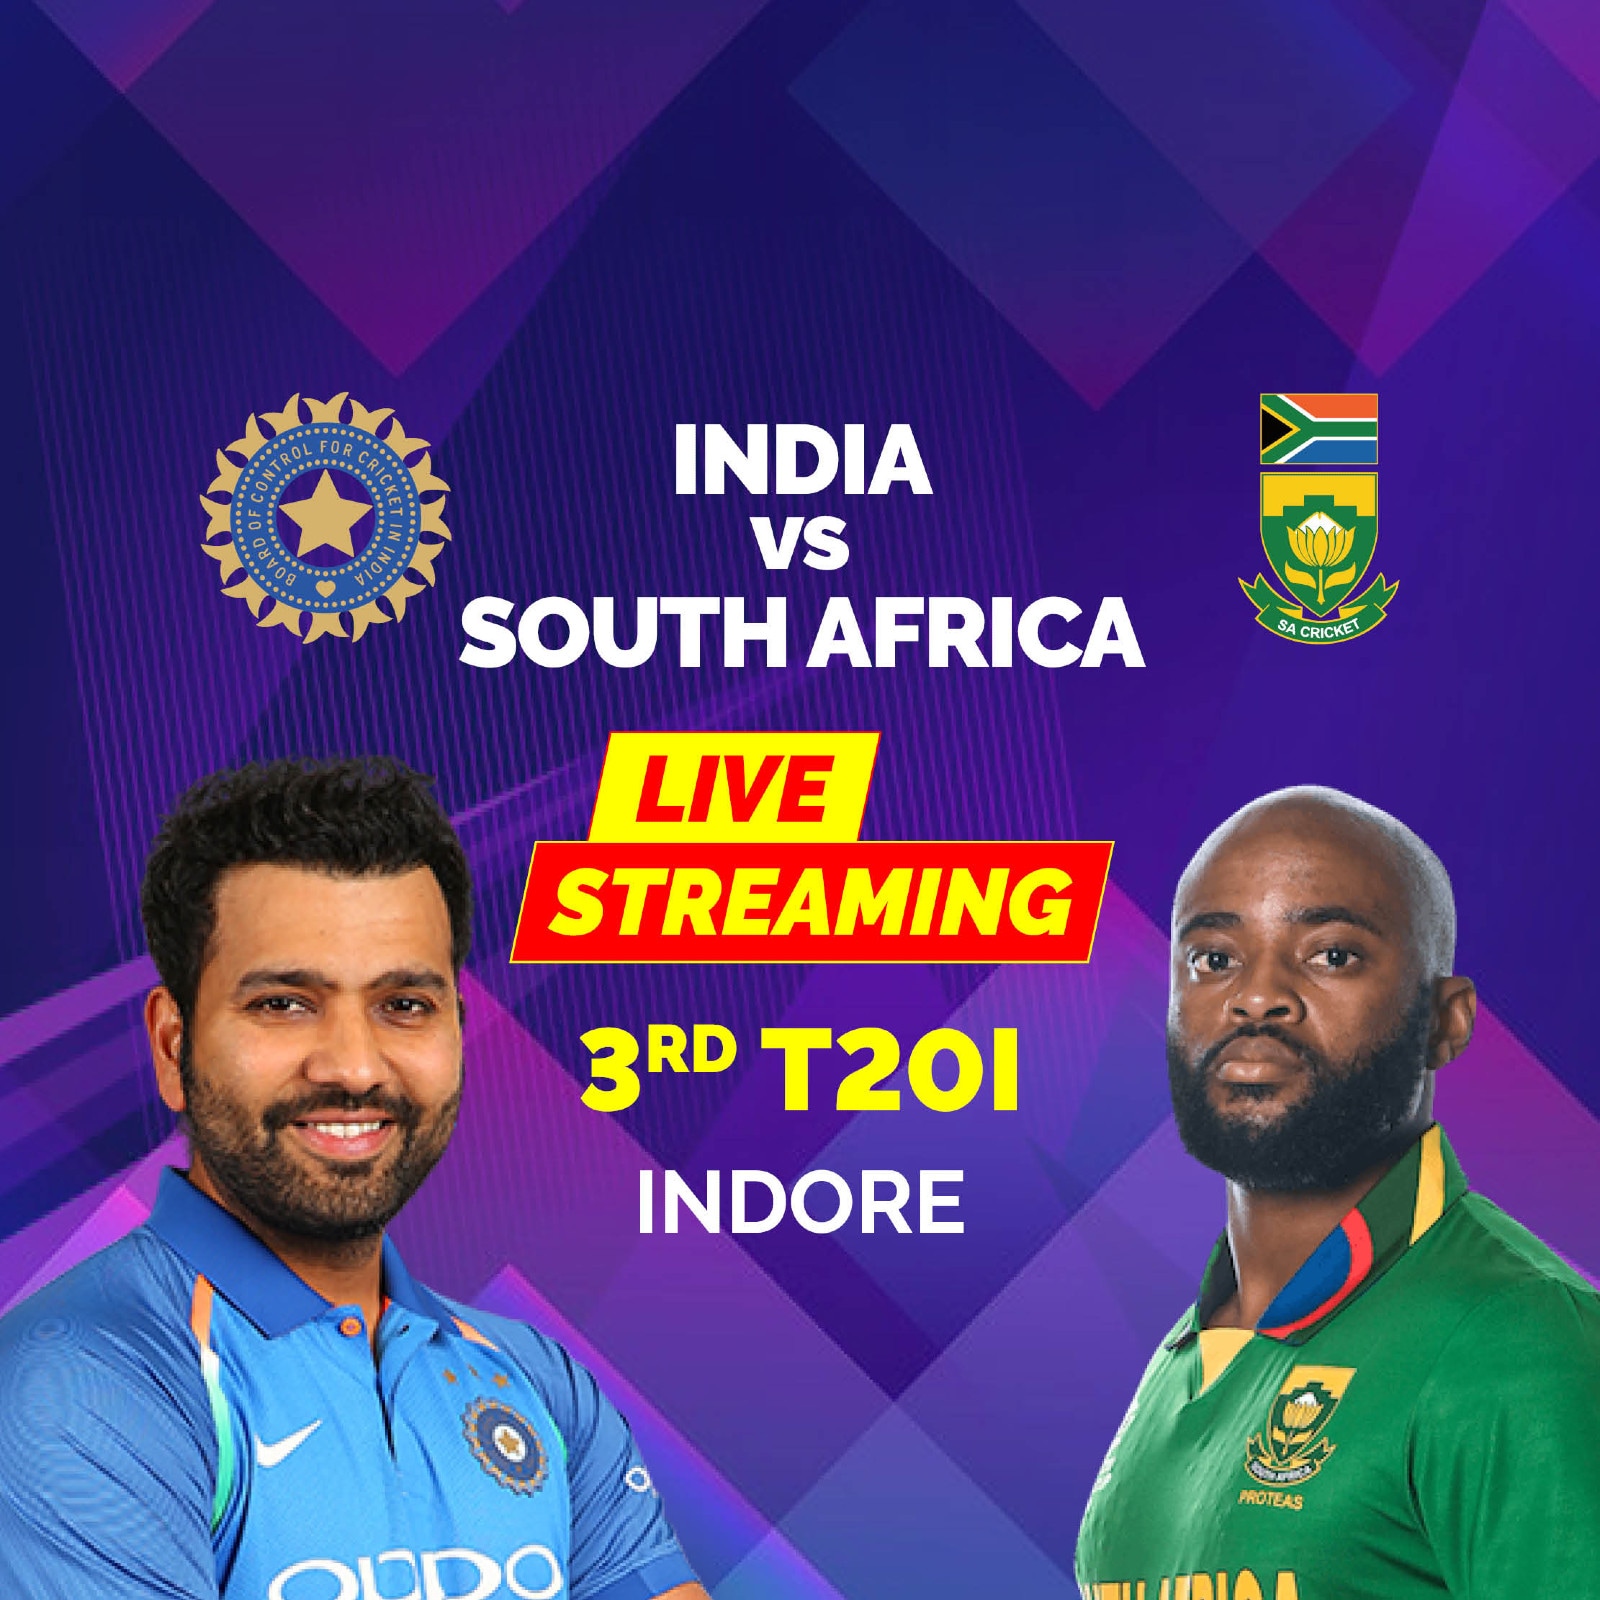 India vs South Africa Live Streaming Cricket When and Where to Watch IND v SA Third T20I Live Coverage on Live TV Online